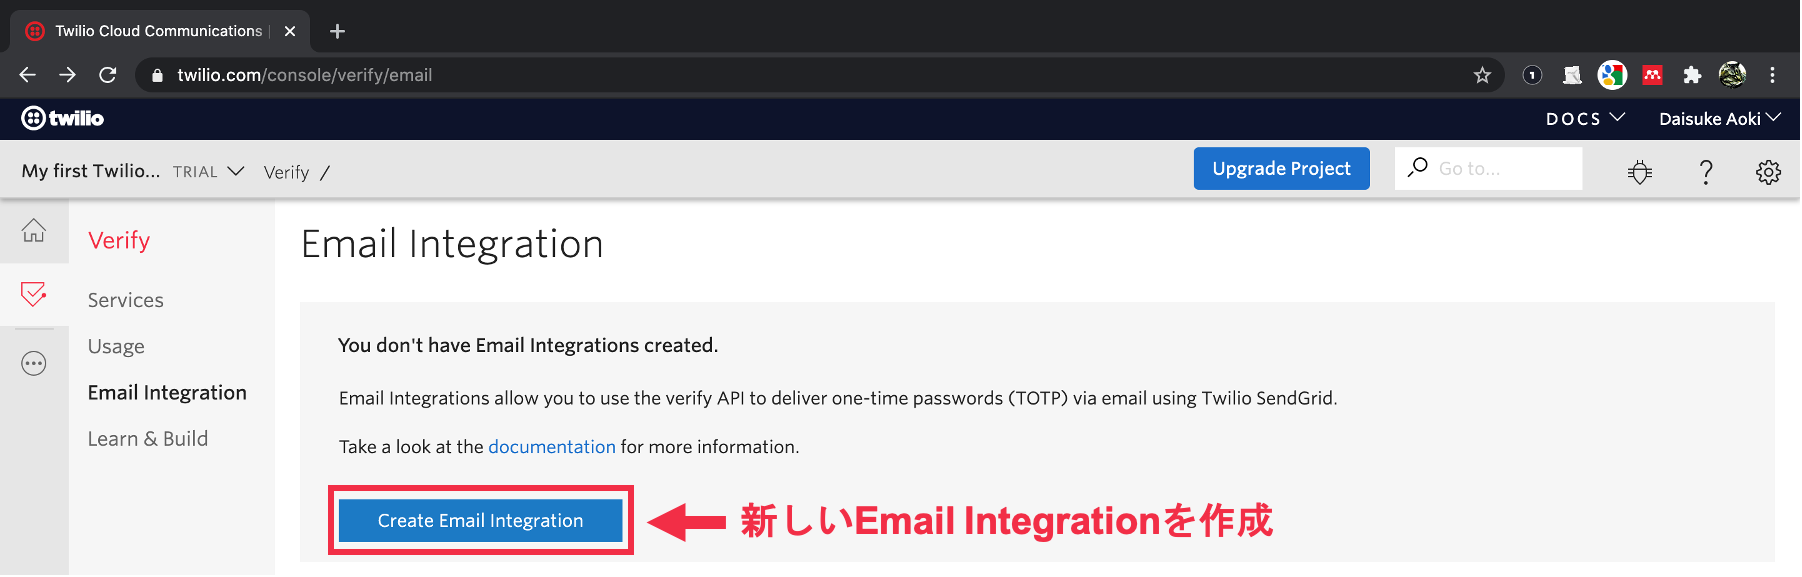 Create Email Integration